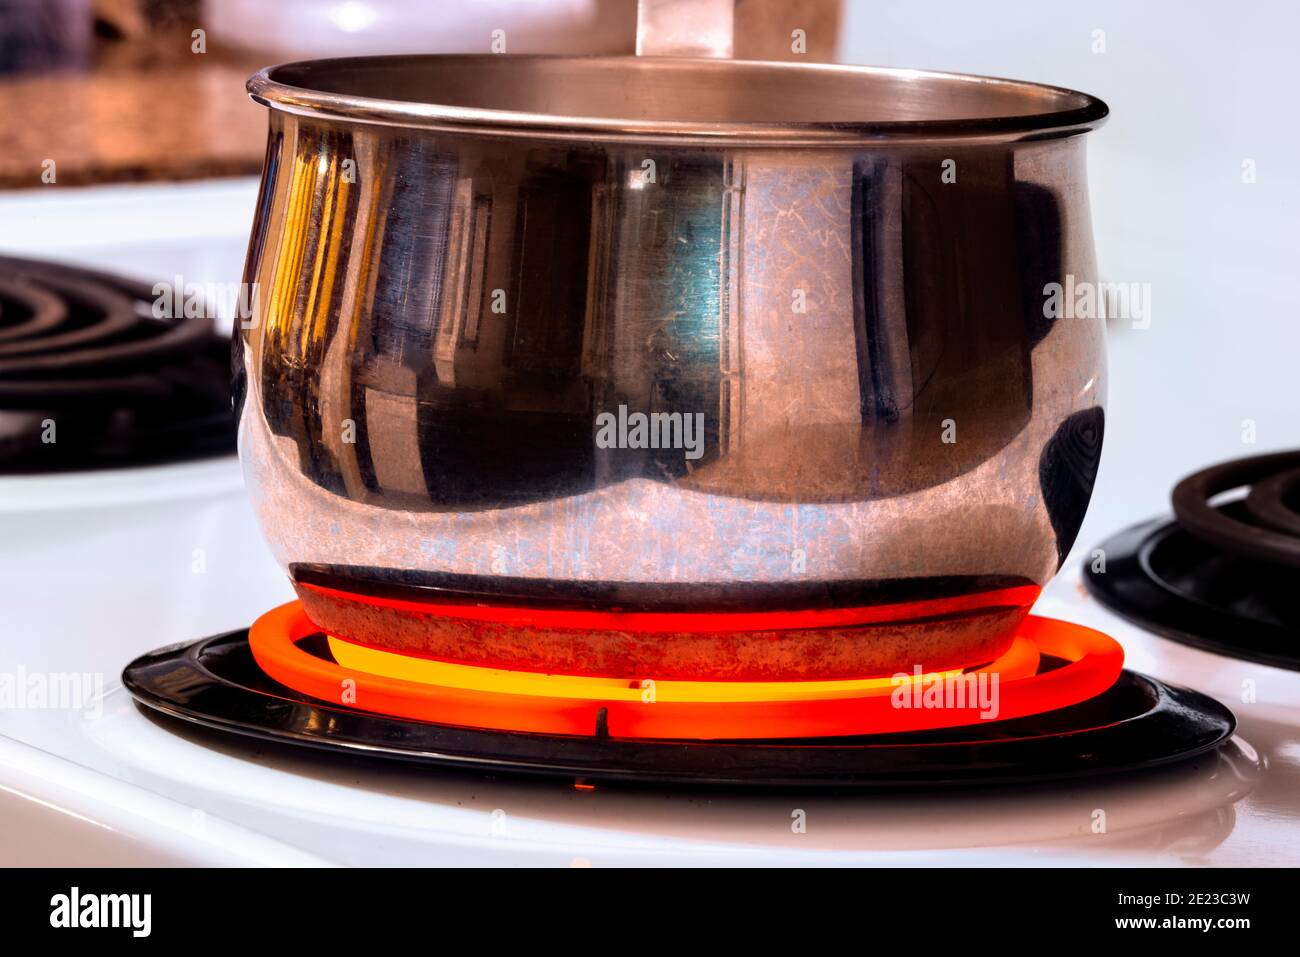 Horizontal shot of a cooking pot on a very hot stove top burner. Stock Photo